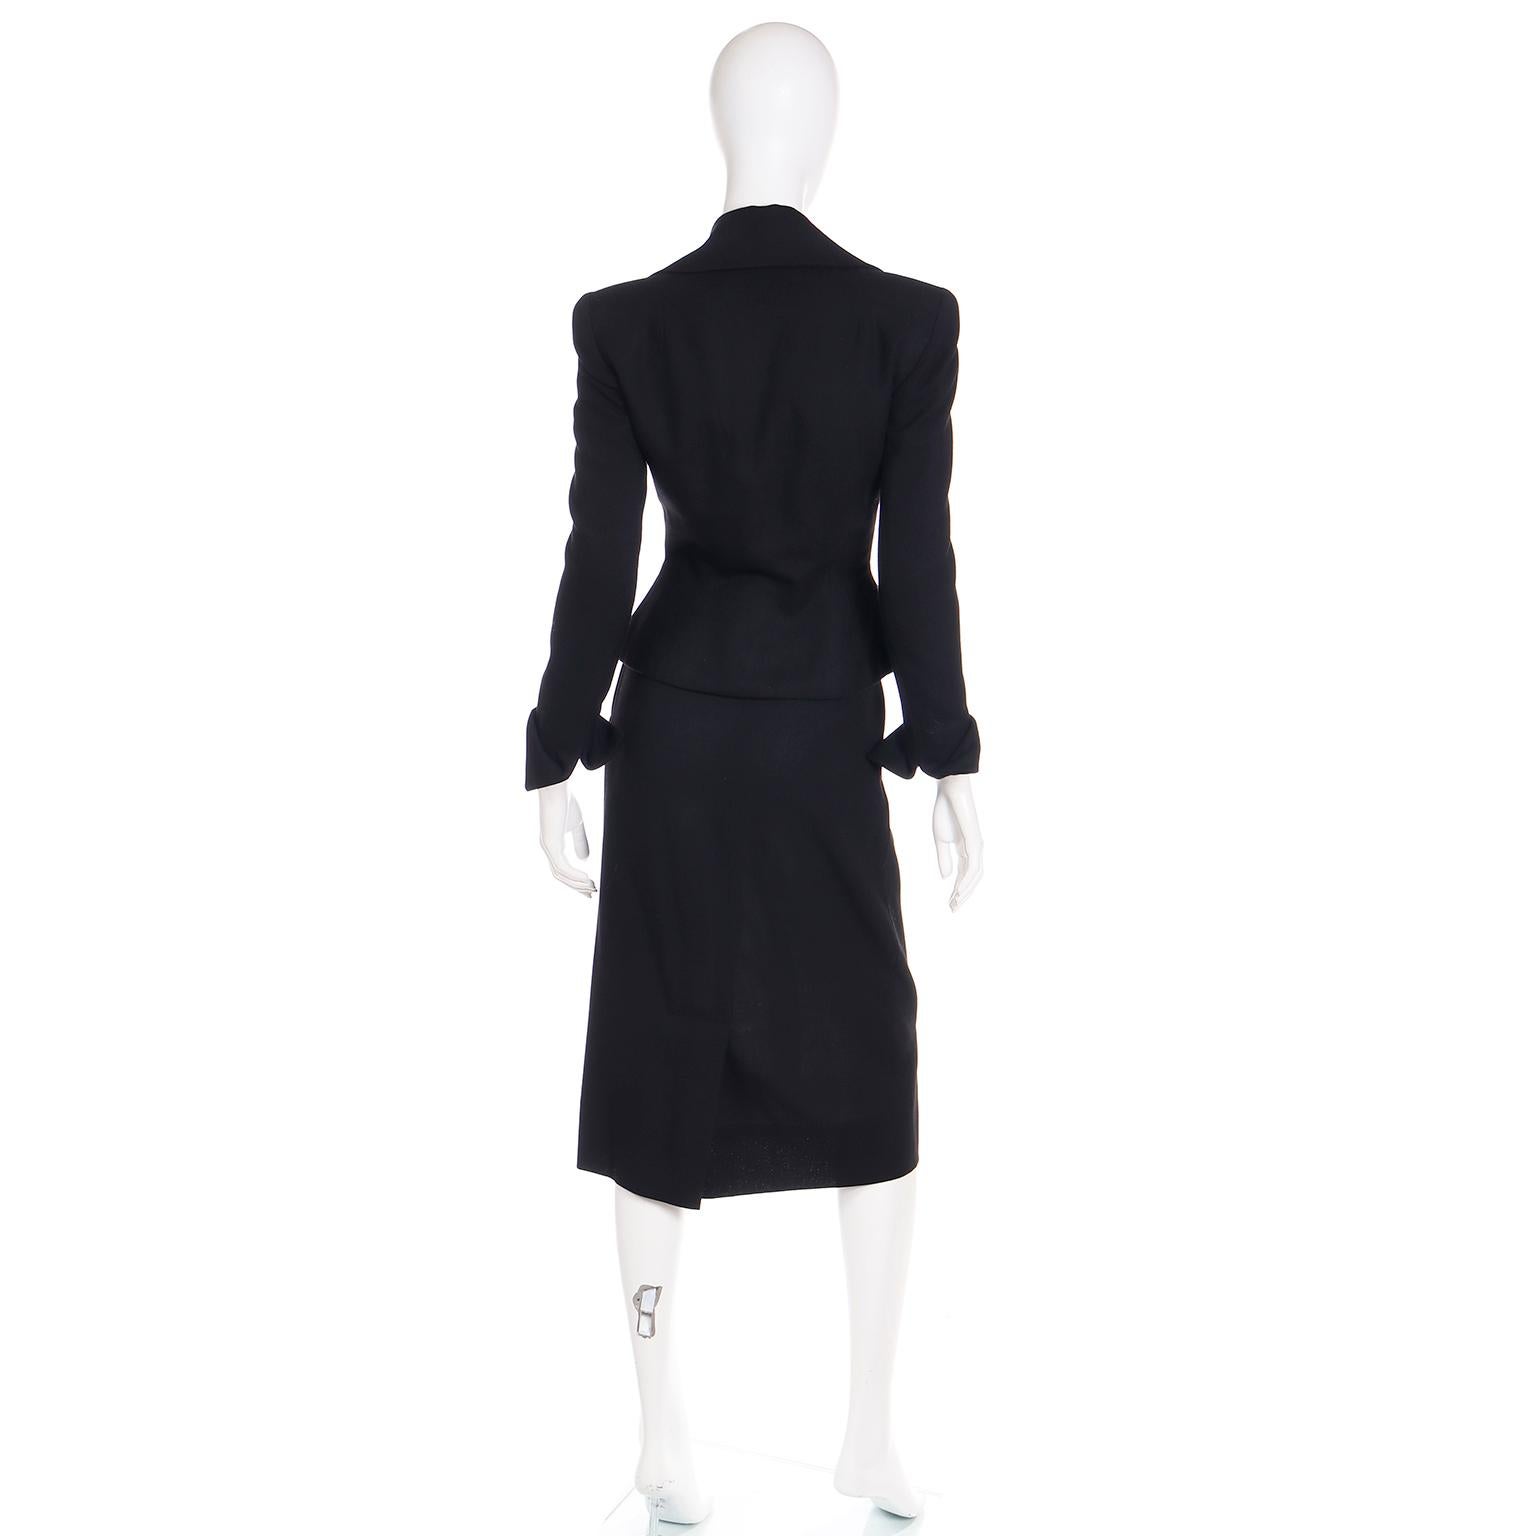 Adele Simpson Vintage 1947/48 Black Double Breasted Cinched Waist Jacket & Skirt For Sale 1